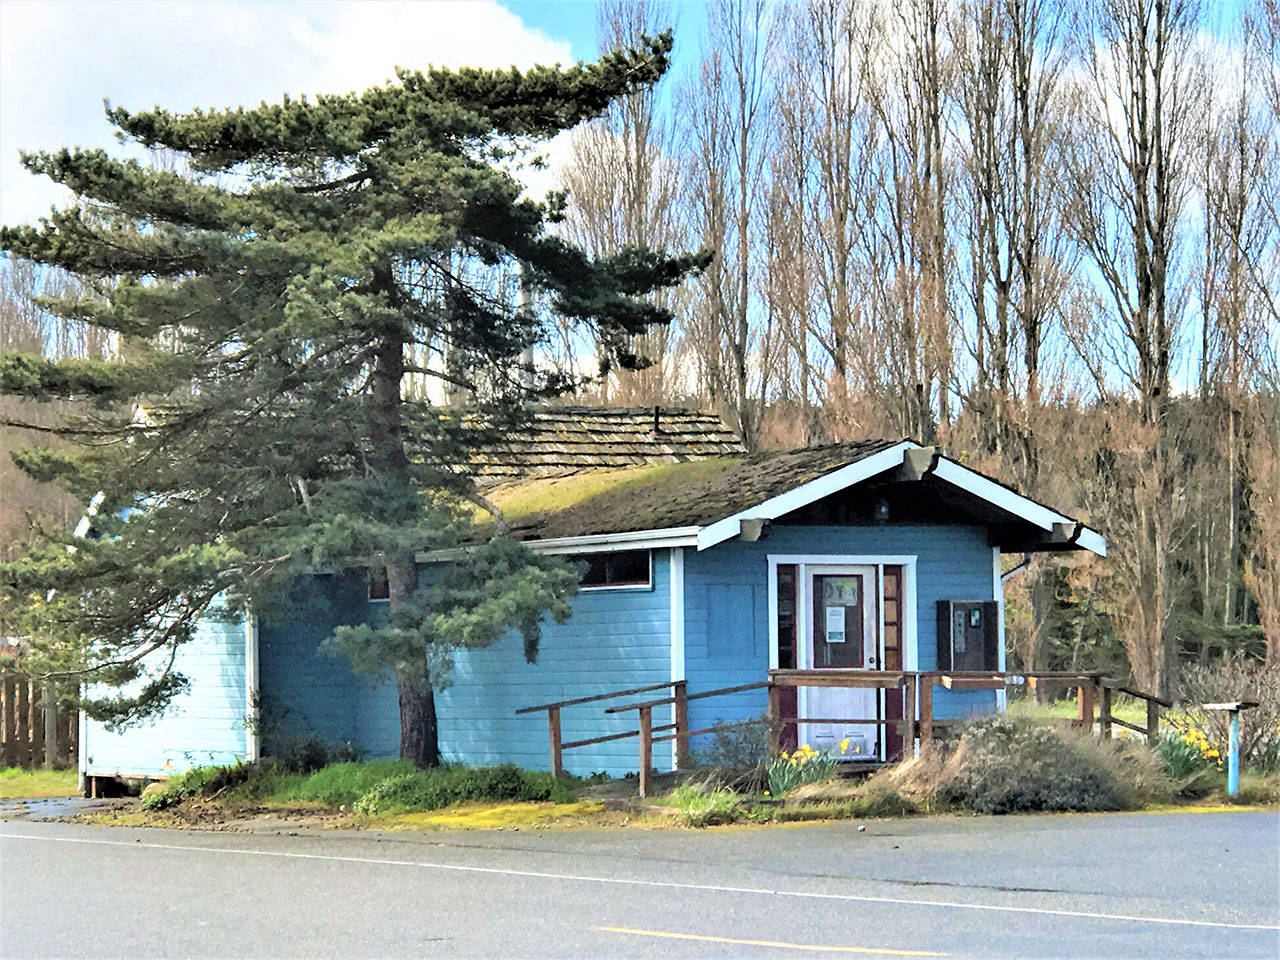 Navy and Port of Port Townsend crews will soon dismantle the Chamber of Jefferson County’s former Port Townsend Visitor Information Center building along West Sims Way in Port Townsend. (Chamber of Jefferson County)